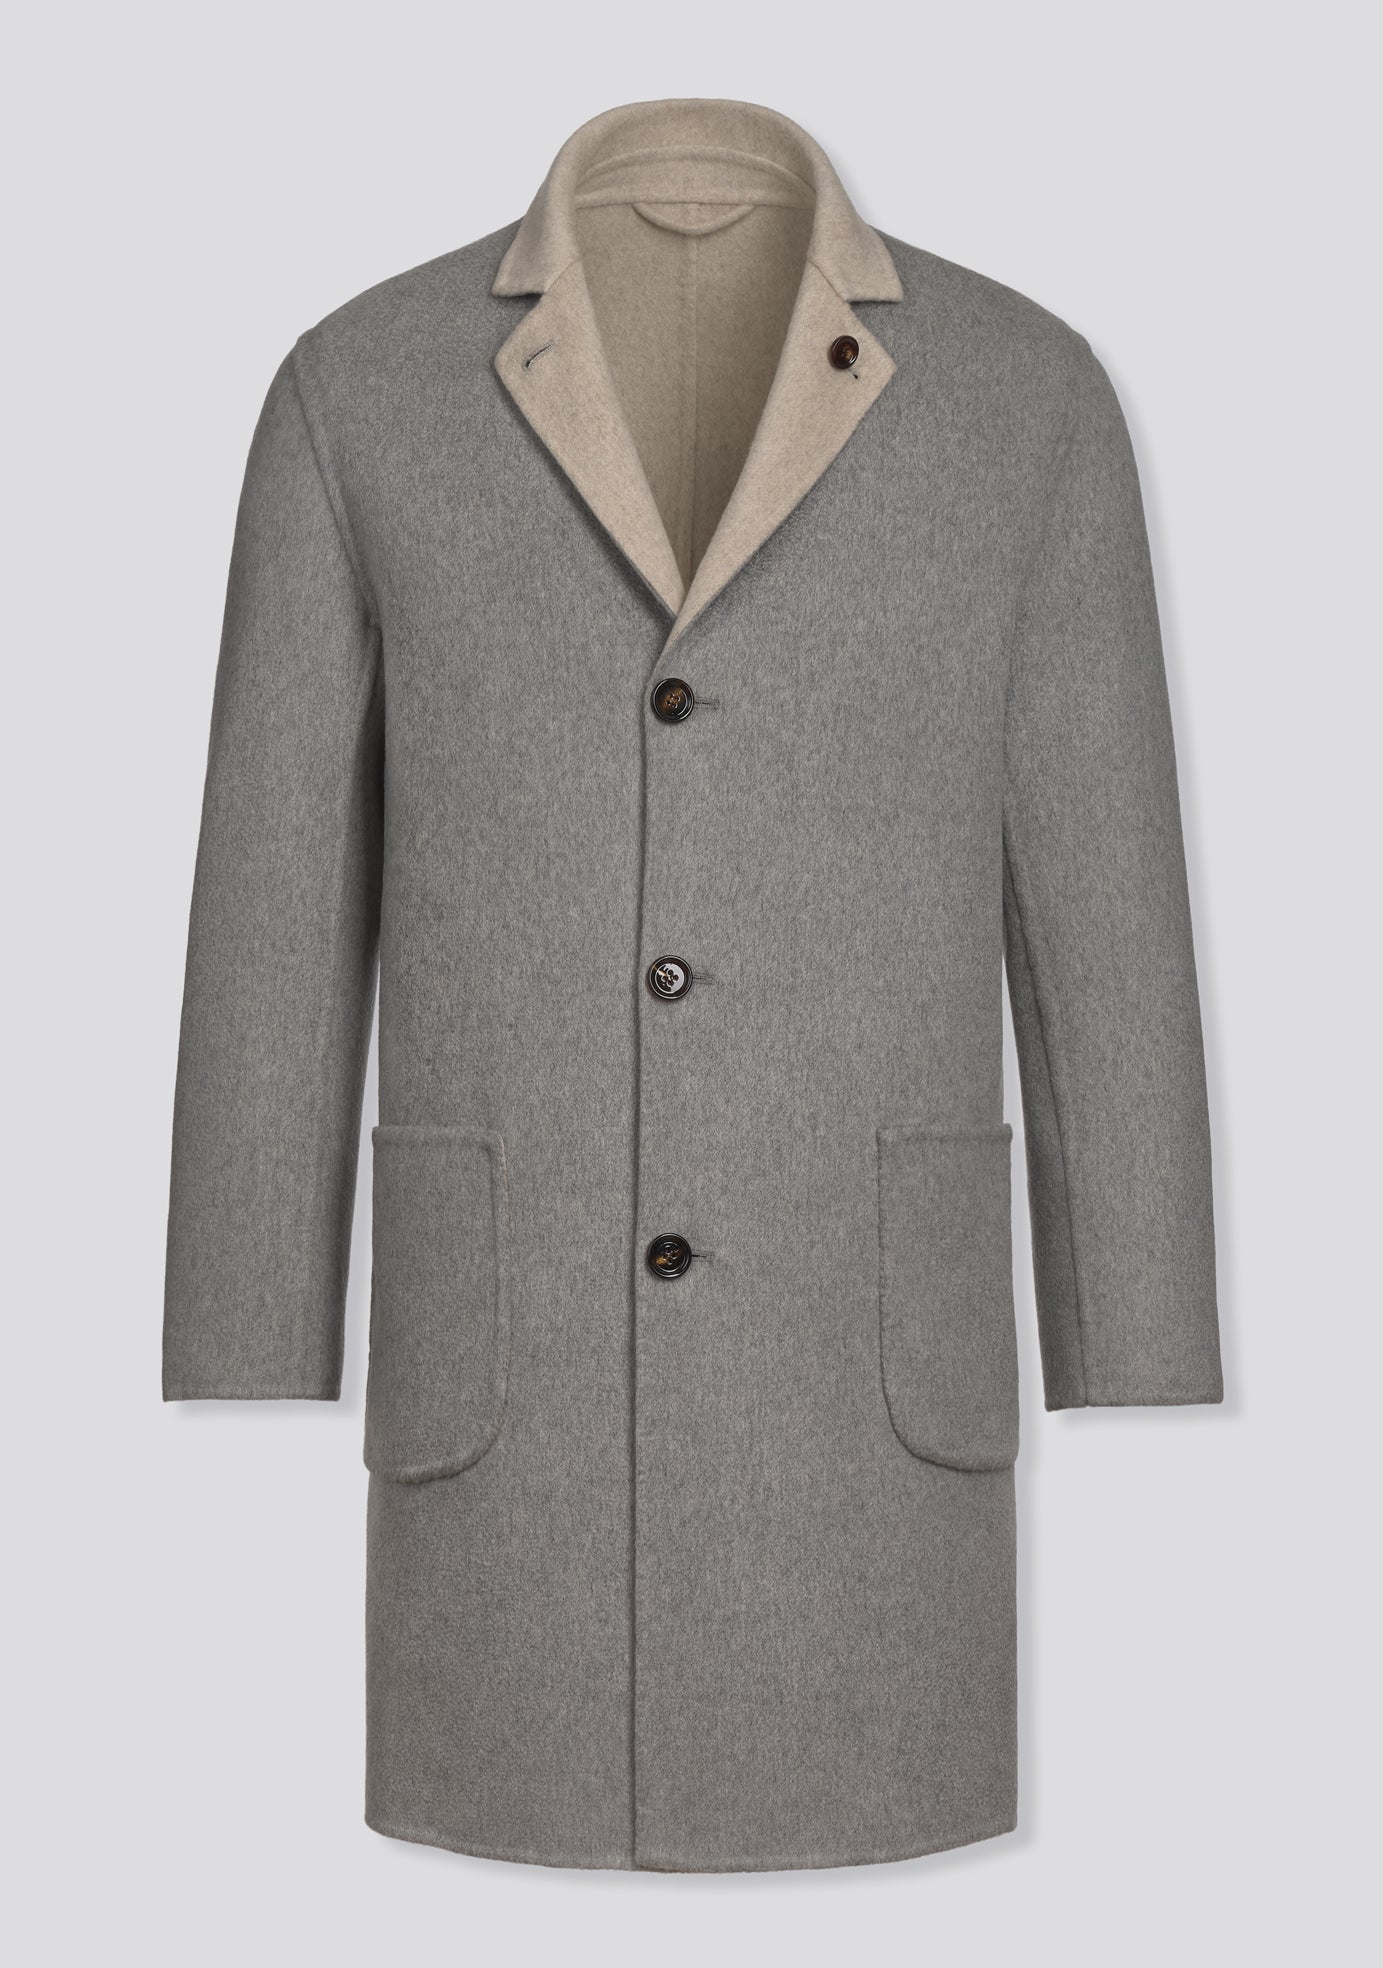 Grey and Beige Double-Faced Cashmere Overcoat